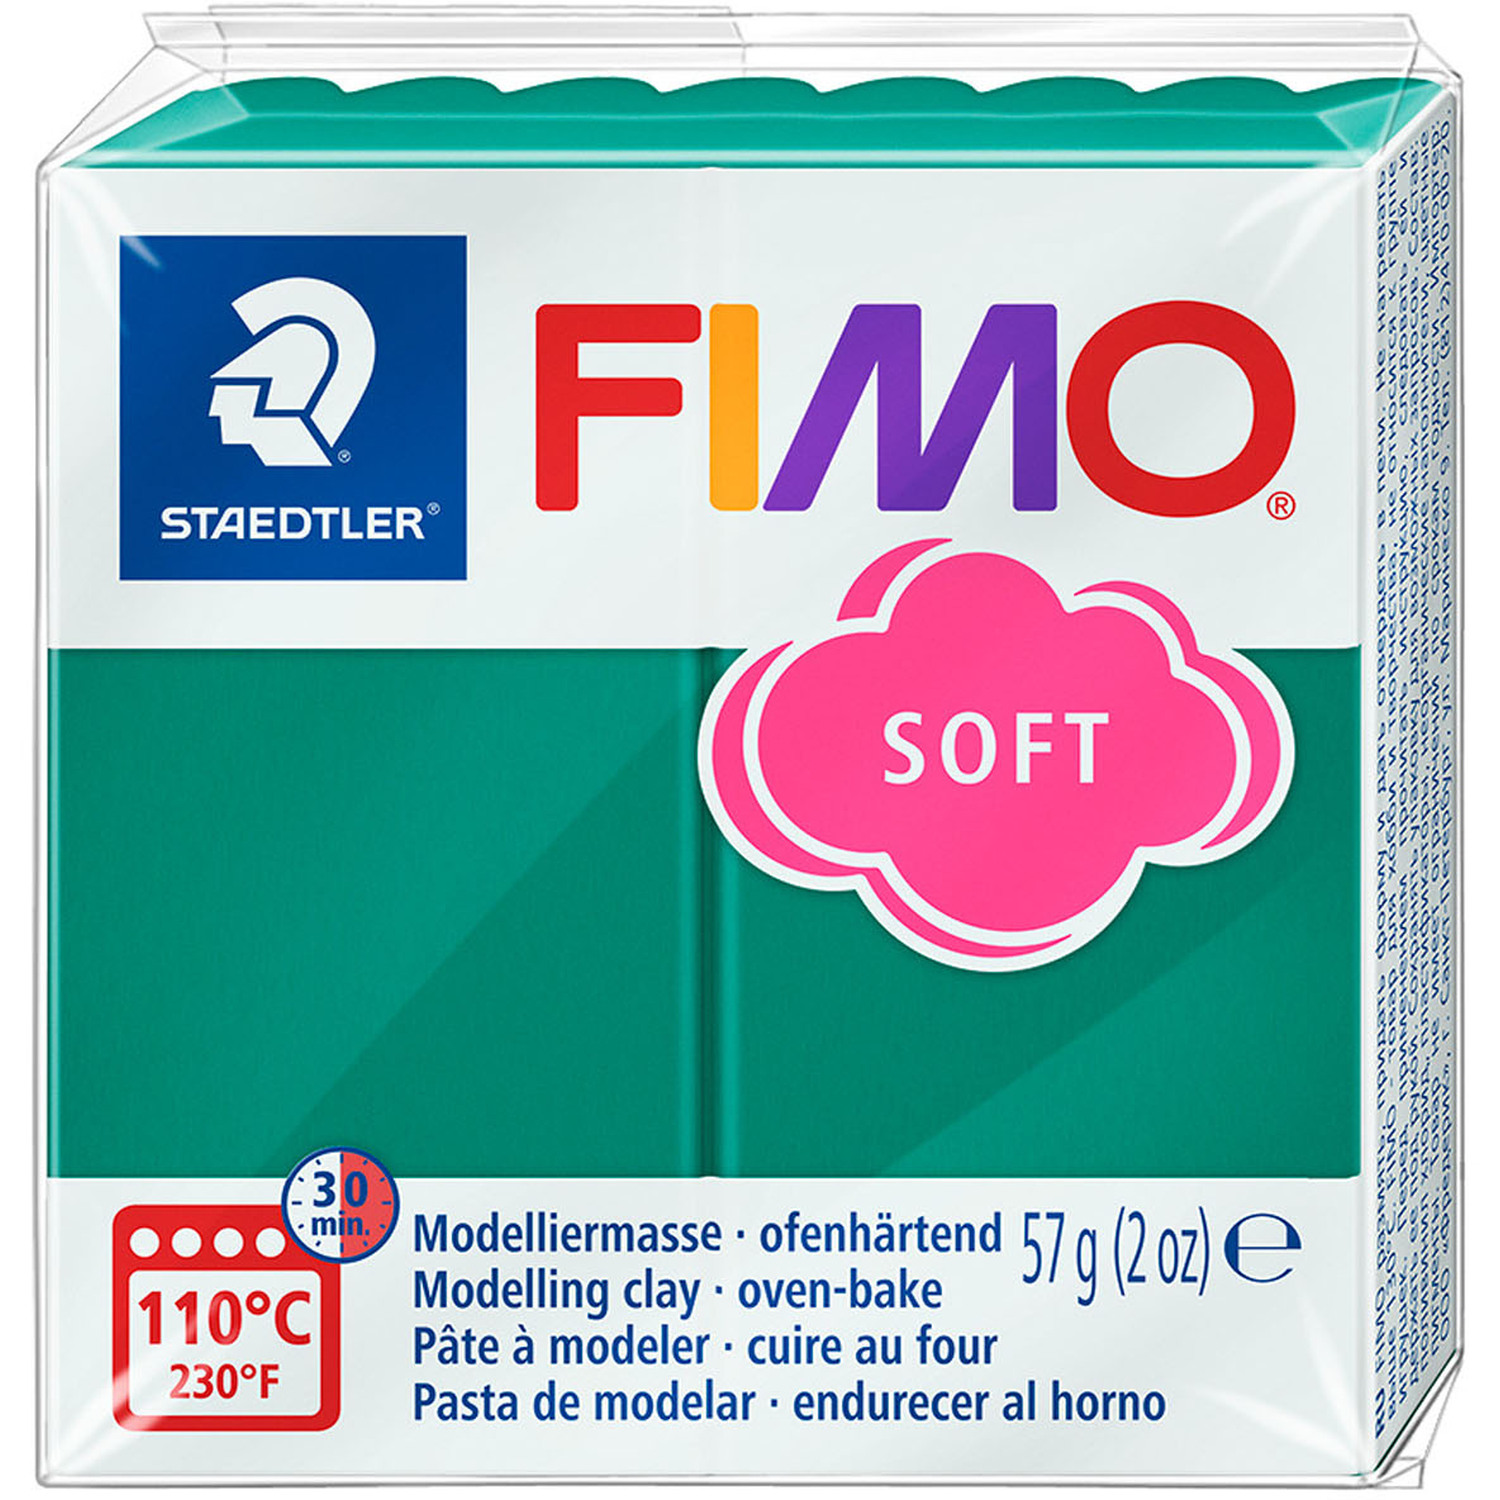 Staedtler FIMO Soft Modelling Clay Block - Emerald Image 1